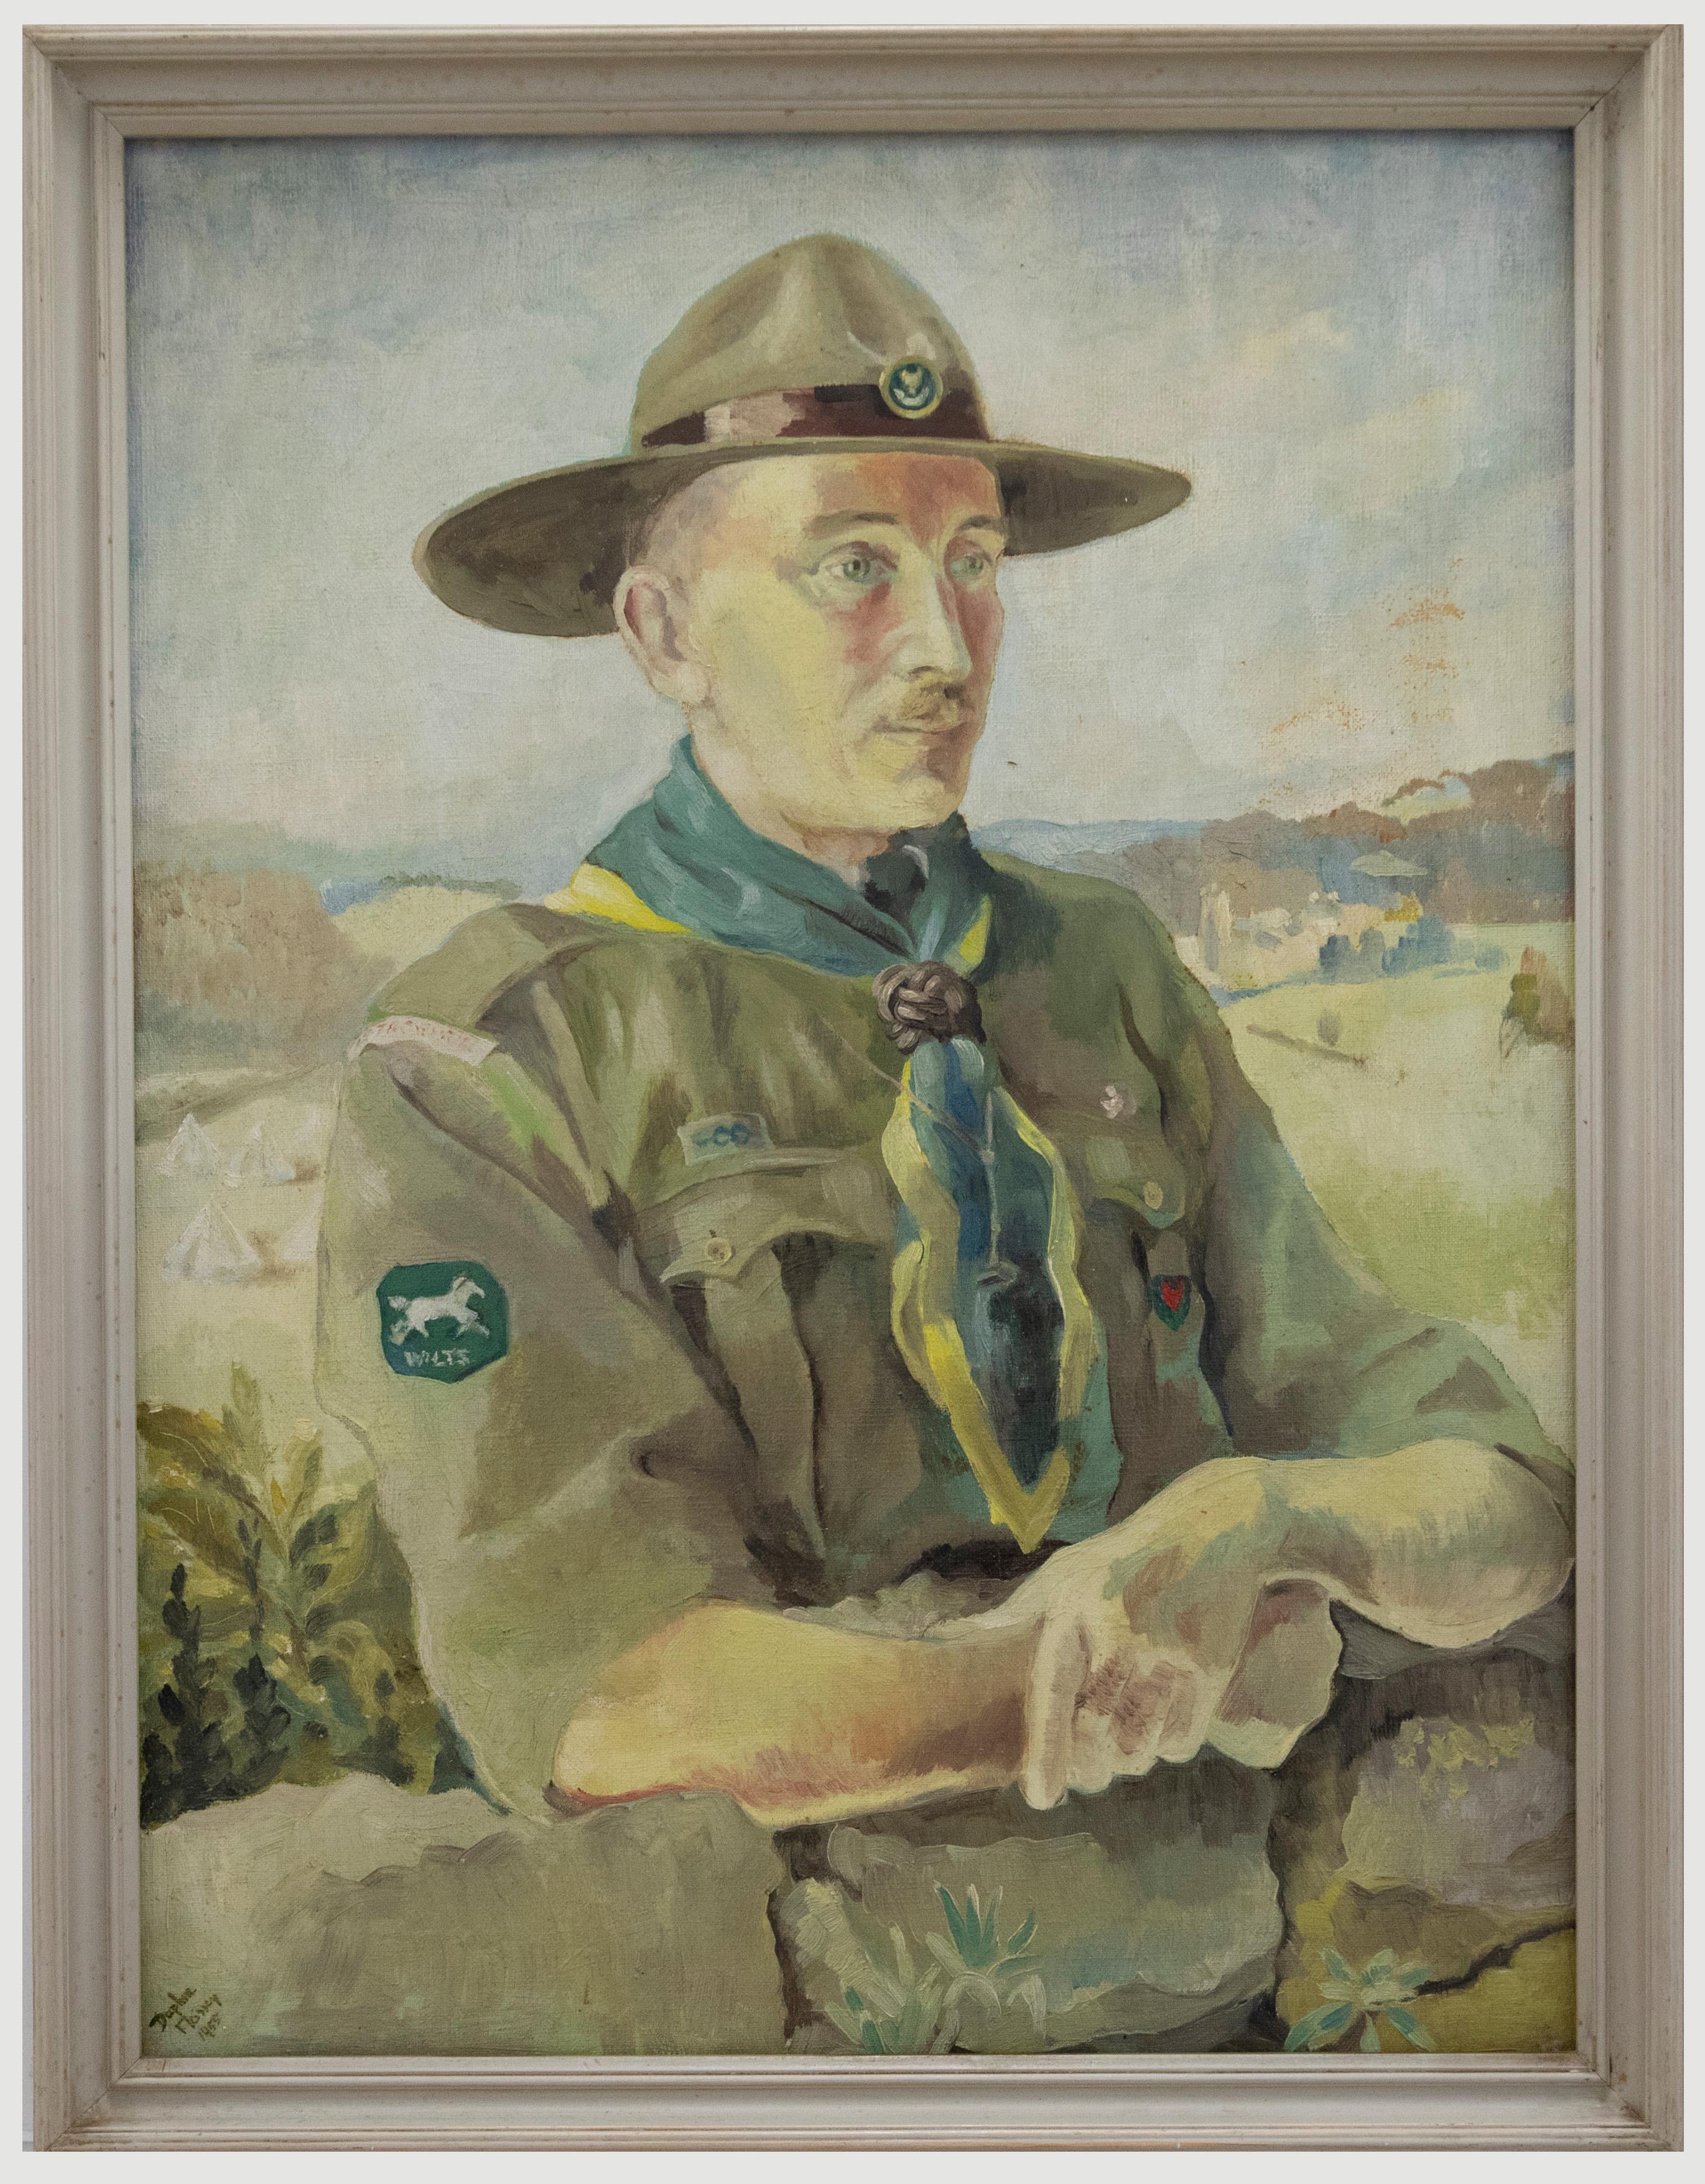 A delightful portrait of Scout Master Mr Lyddieth. The portrait was presented to him after 30 years of service to the Boy Scouts. Extensive provenance has been kept with the painting, this includes an exhibition label from the Bath Society of